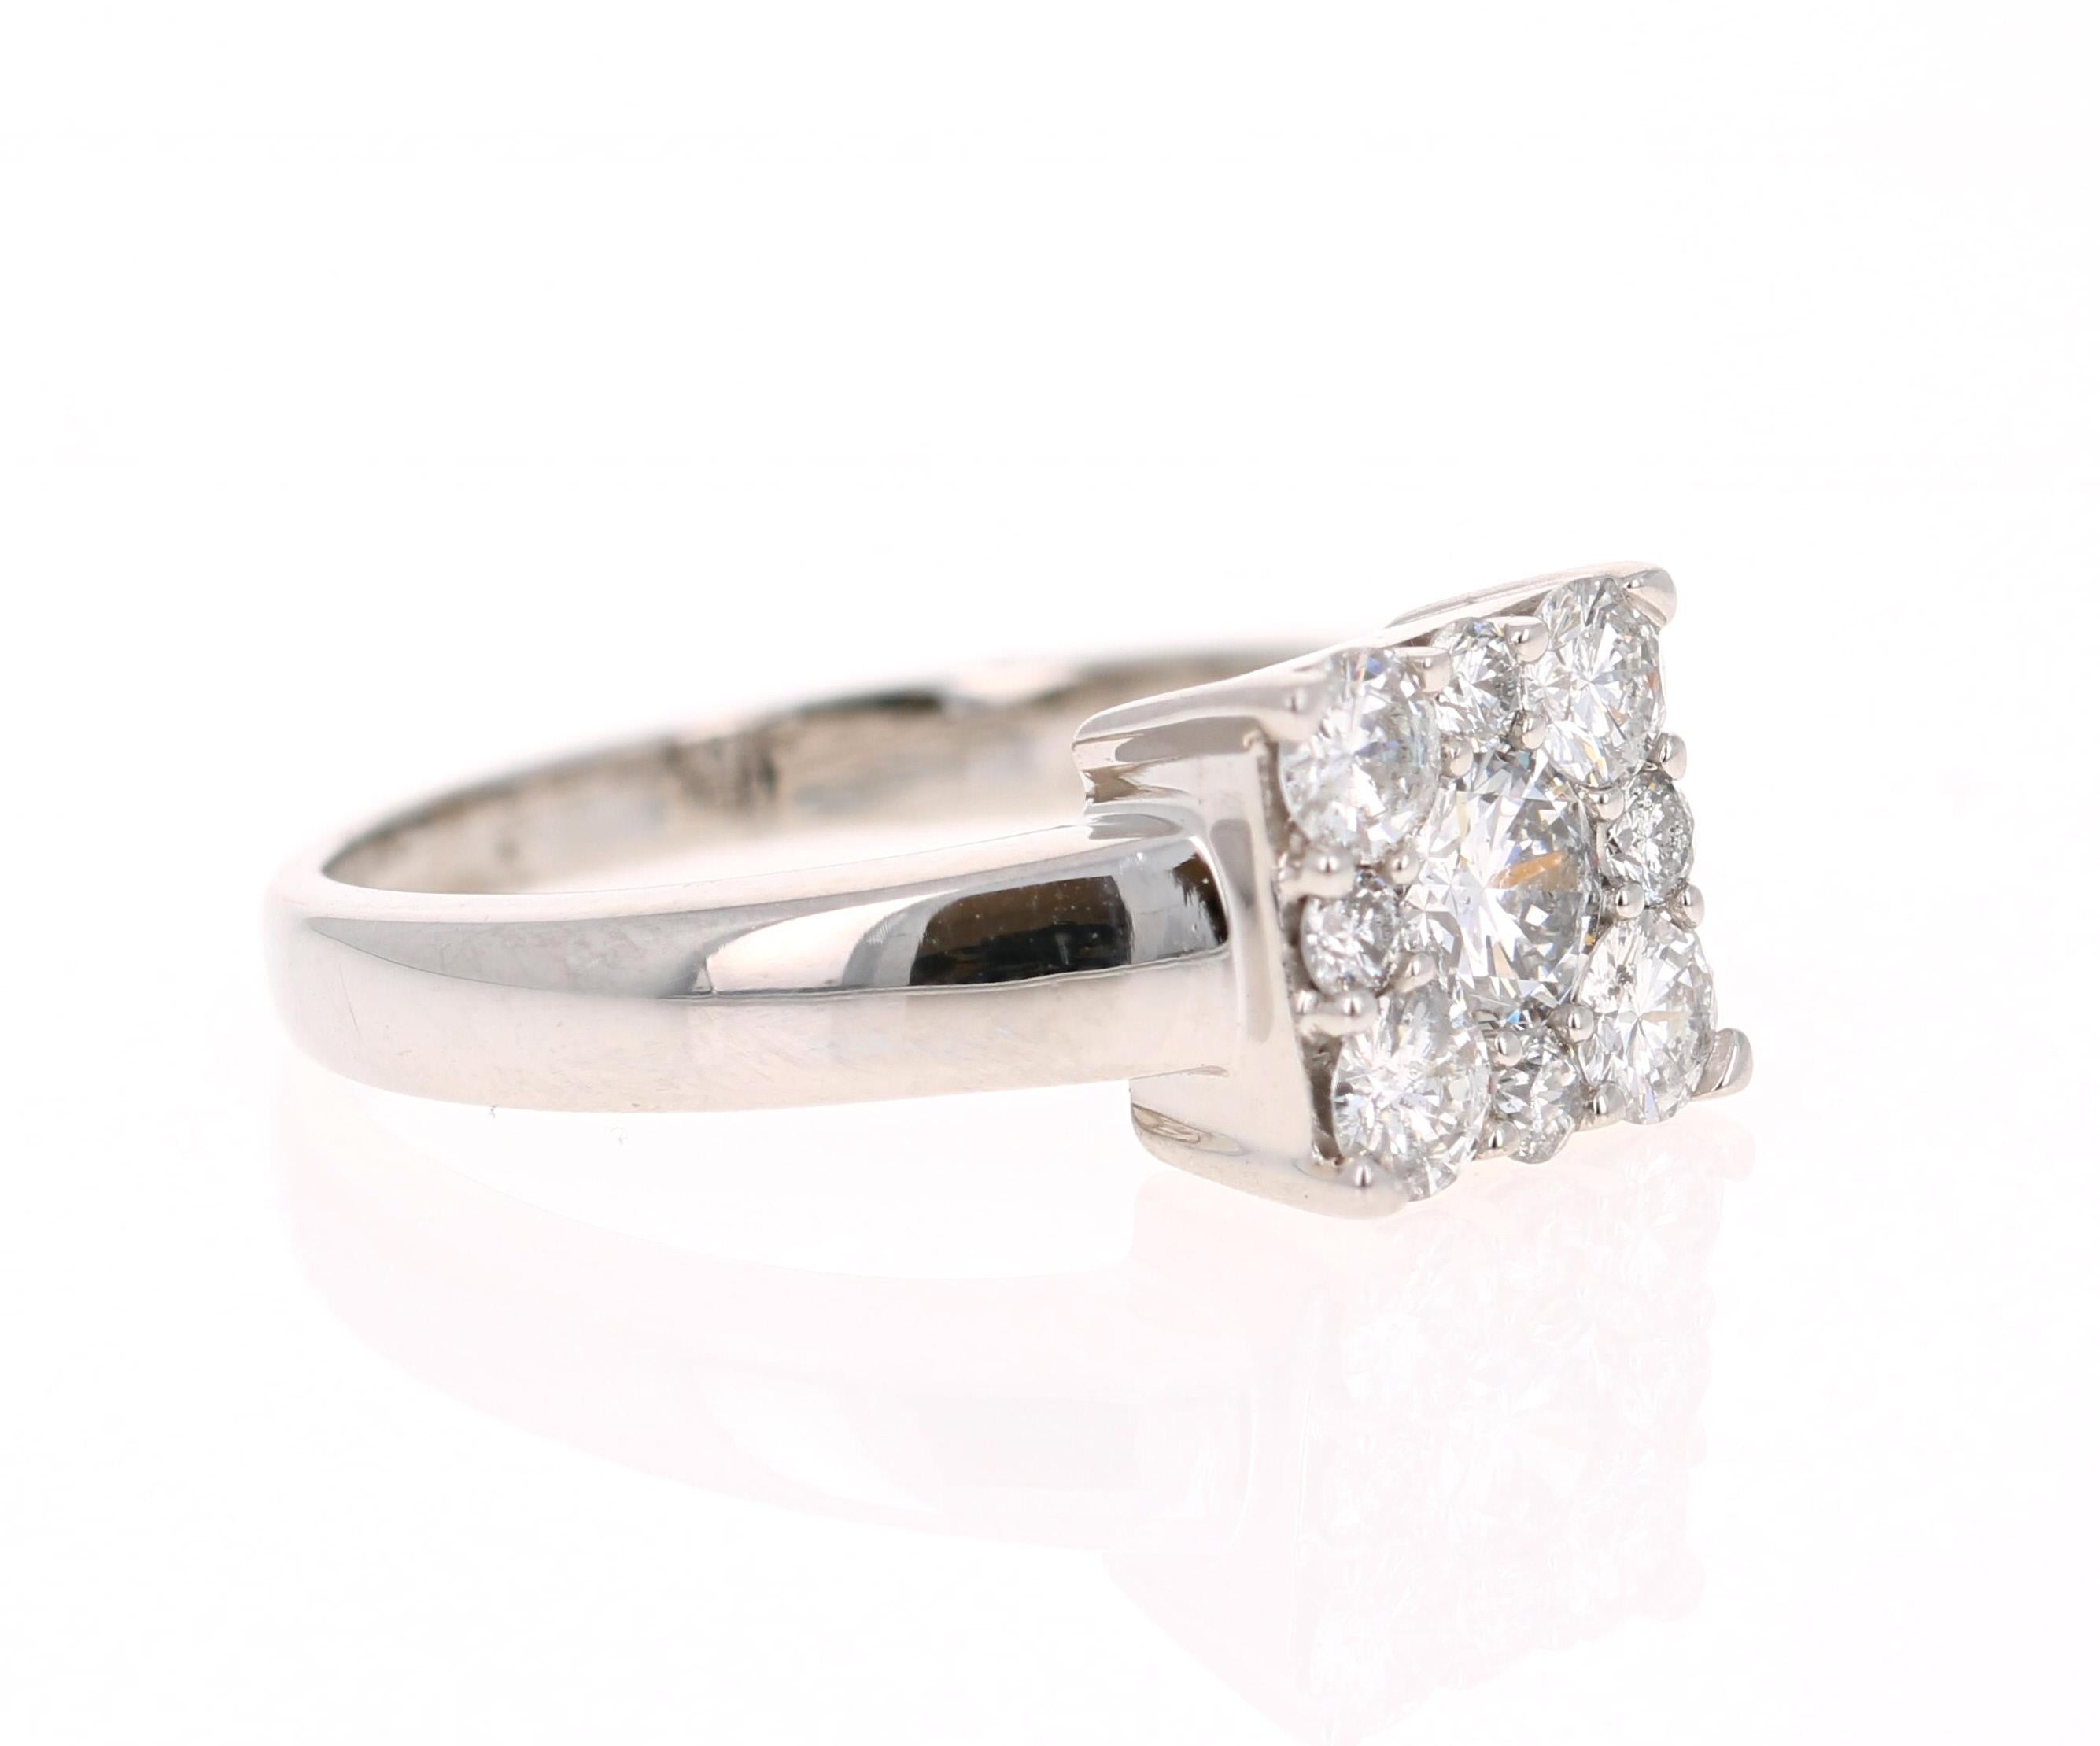 A beautiful round cut diamond ring set in a square invisible setting creating a larger look! 

The ring has 8 Round Cut Diamonds that weigh 1.00 Carat. 

It is set in 14K White Gold and is 5.7 grams. 

The ring size is a 7 and can be resized if